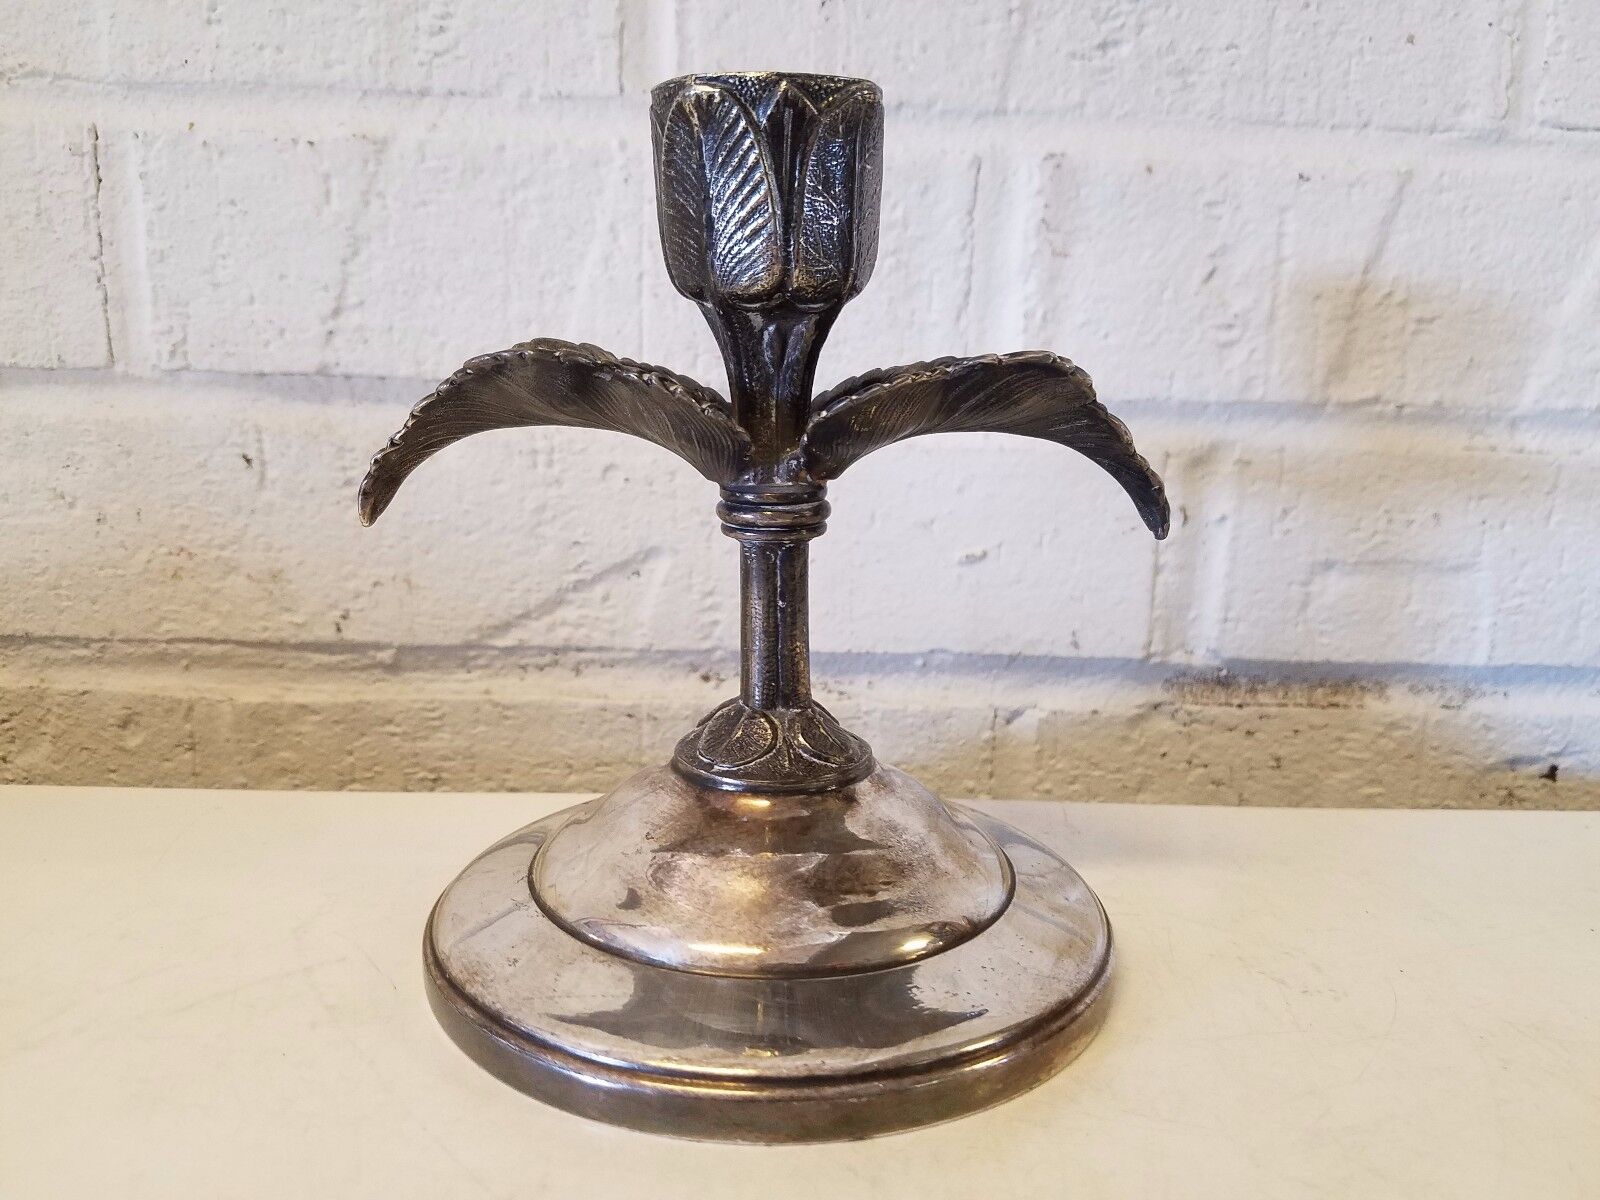 Vintage WF Silver Plate Candle Holder with Floral Decorations